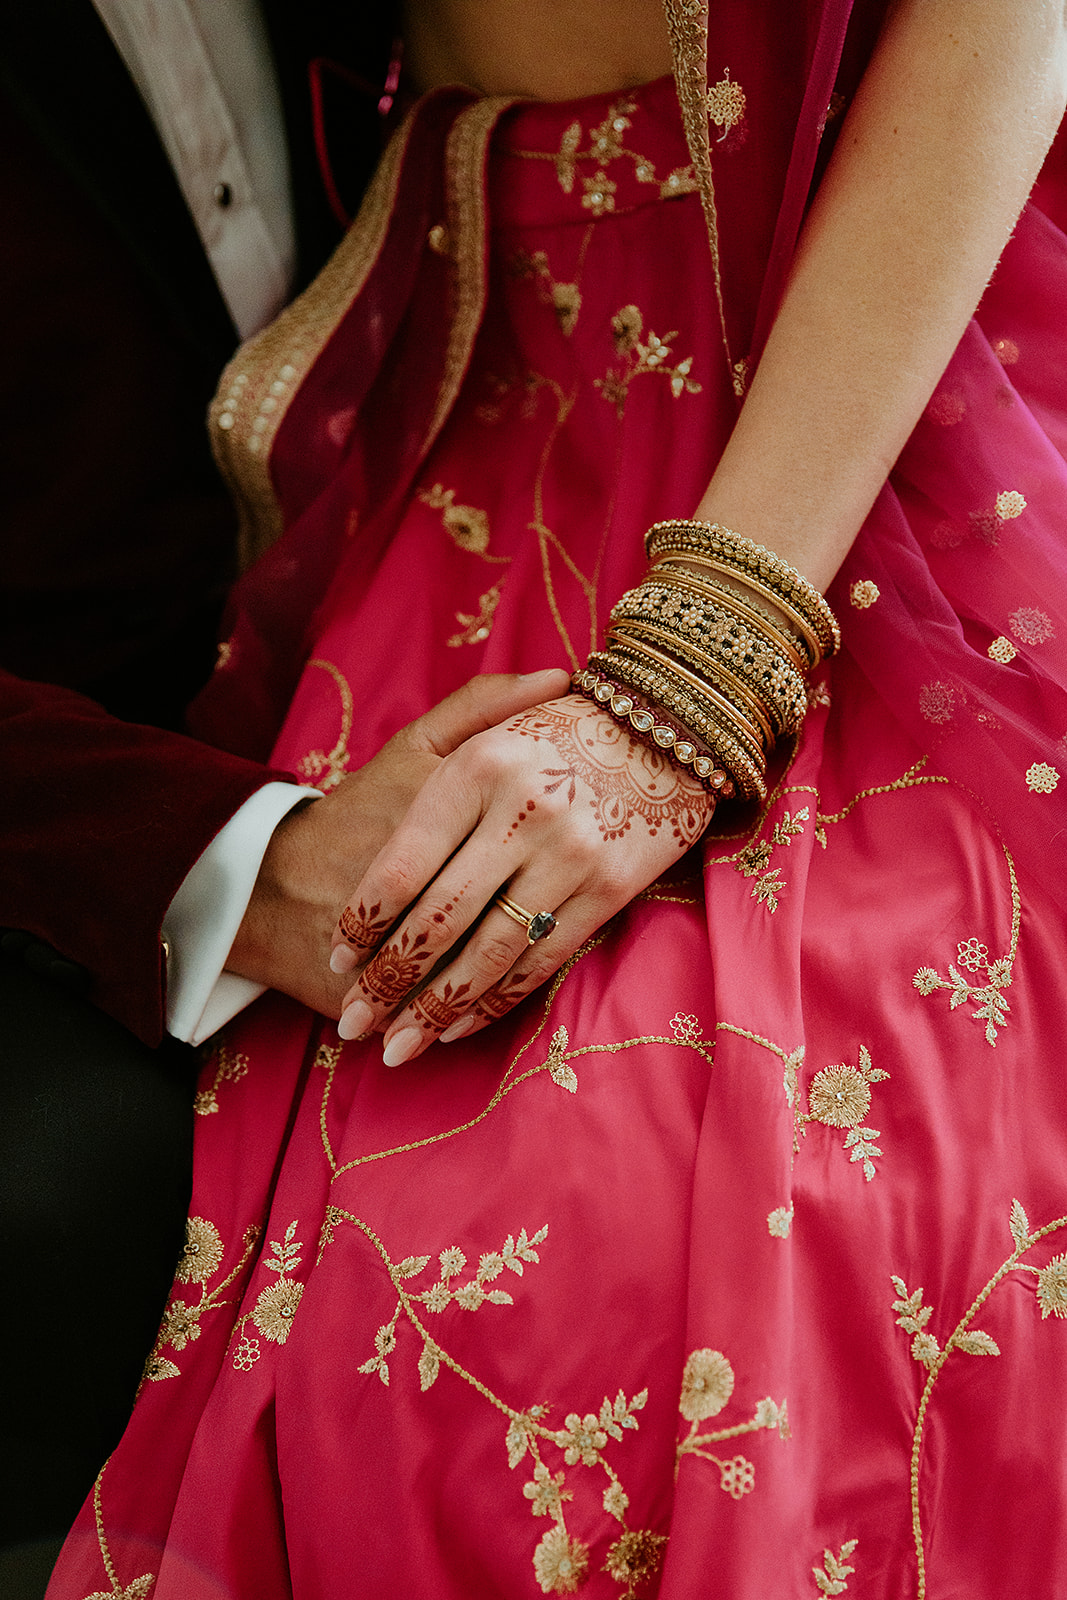 Inspiration for an Indian wedding that meets Moroccan styling